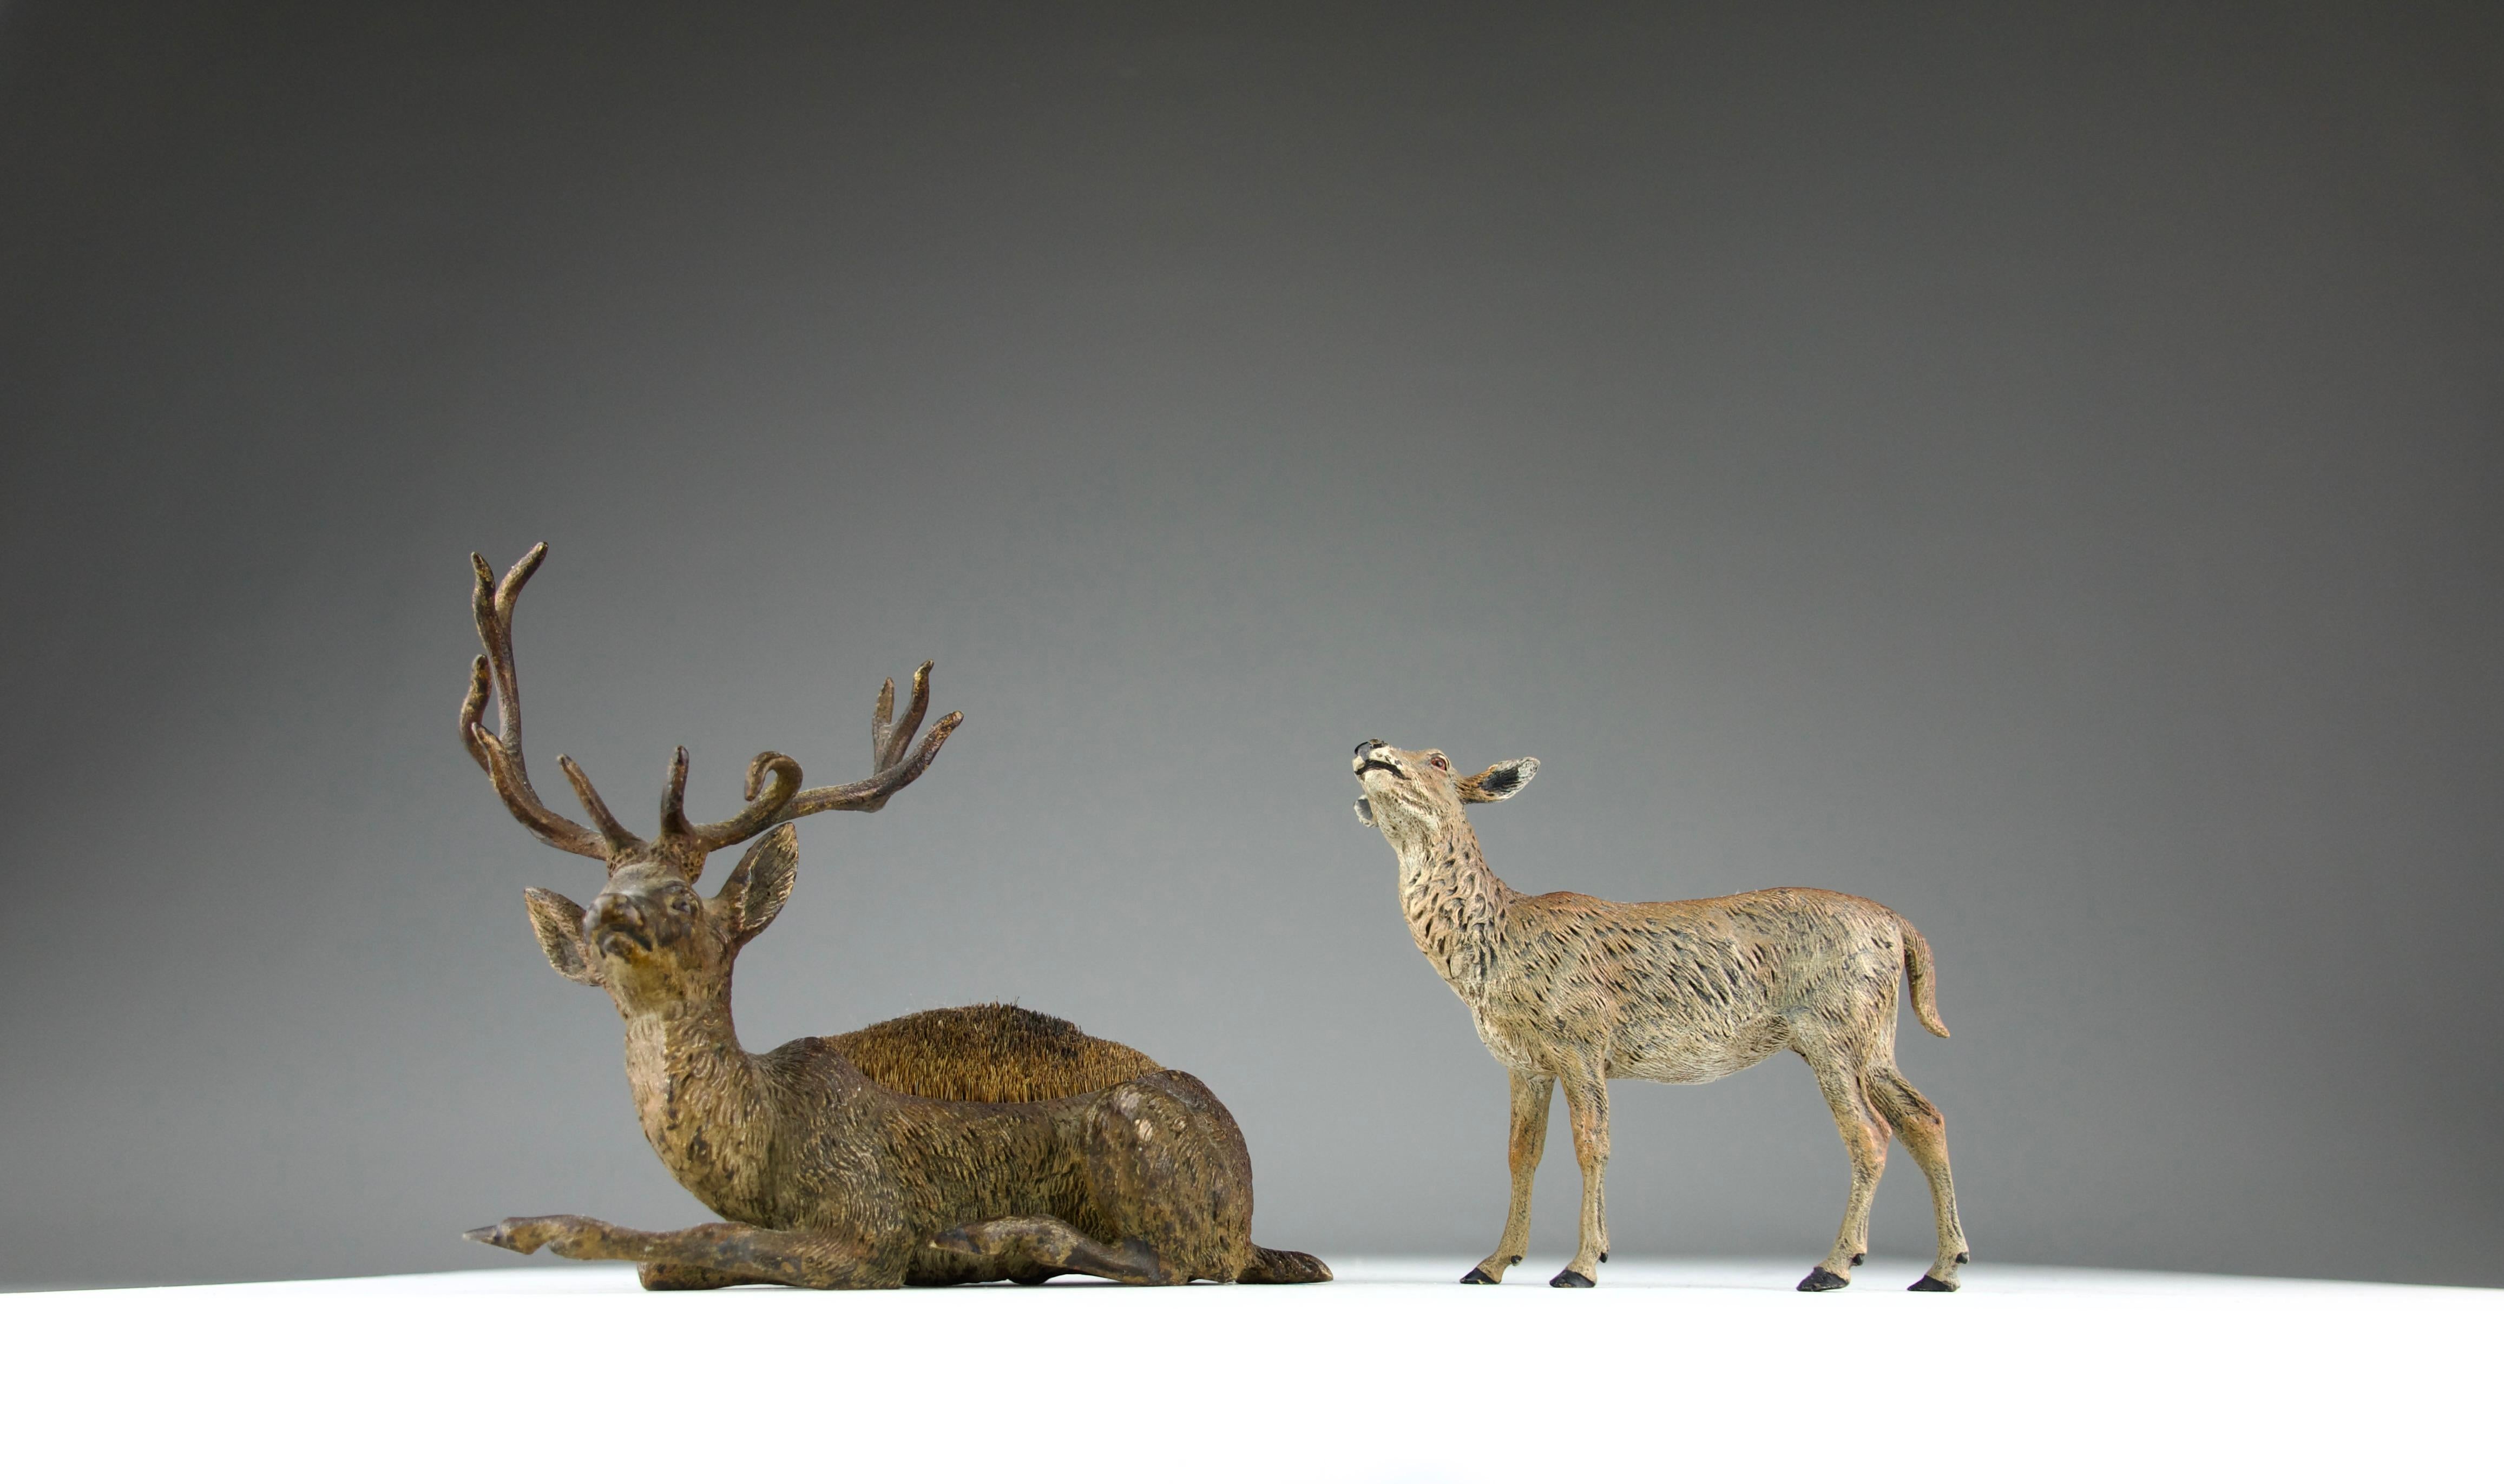 Superb 19th century Vienna bronze sculptures of a stag, the doe is a late 20th century/early 21st production of Vienna bronzes. The deer sculpture is attributed to the Geschütz manufacture as similar models are referenced and signed. It was also